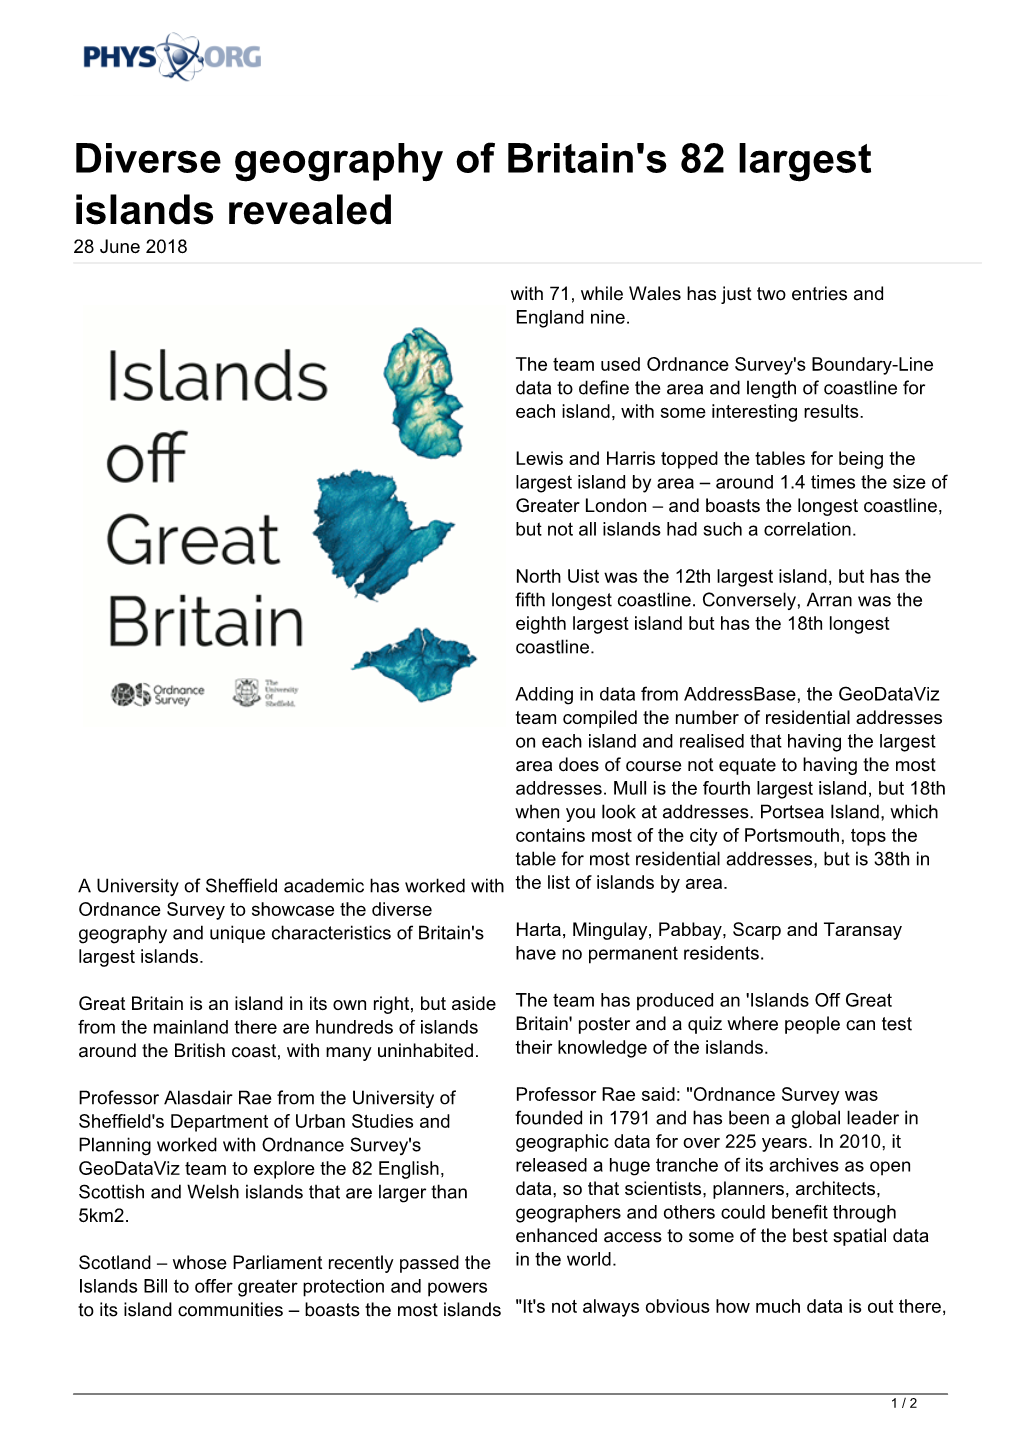 Diverse Geography of Britain's 82 Largest Islands Revealed 28 June 2018